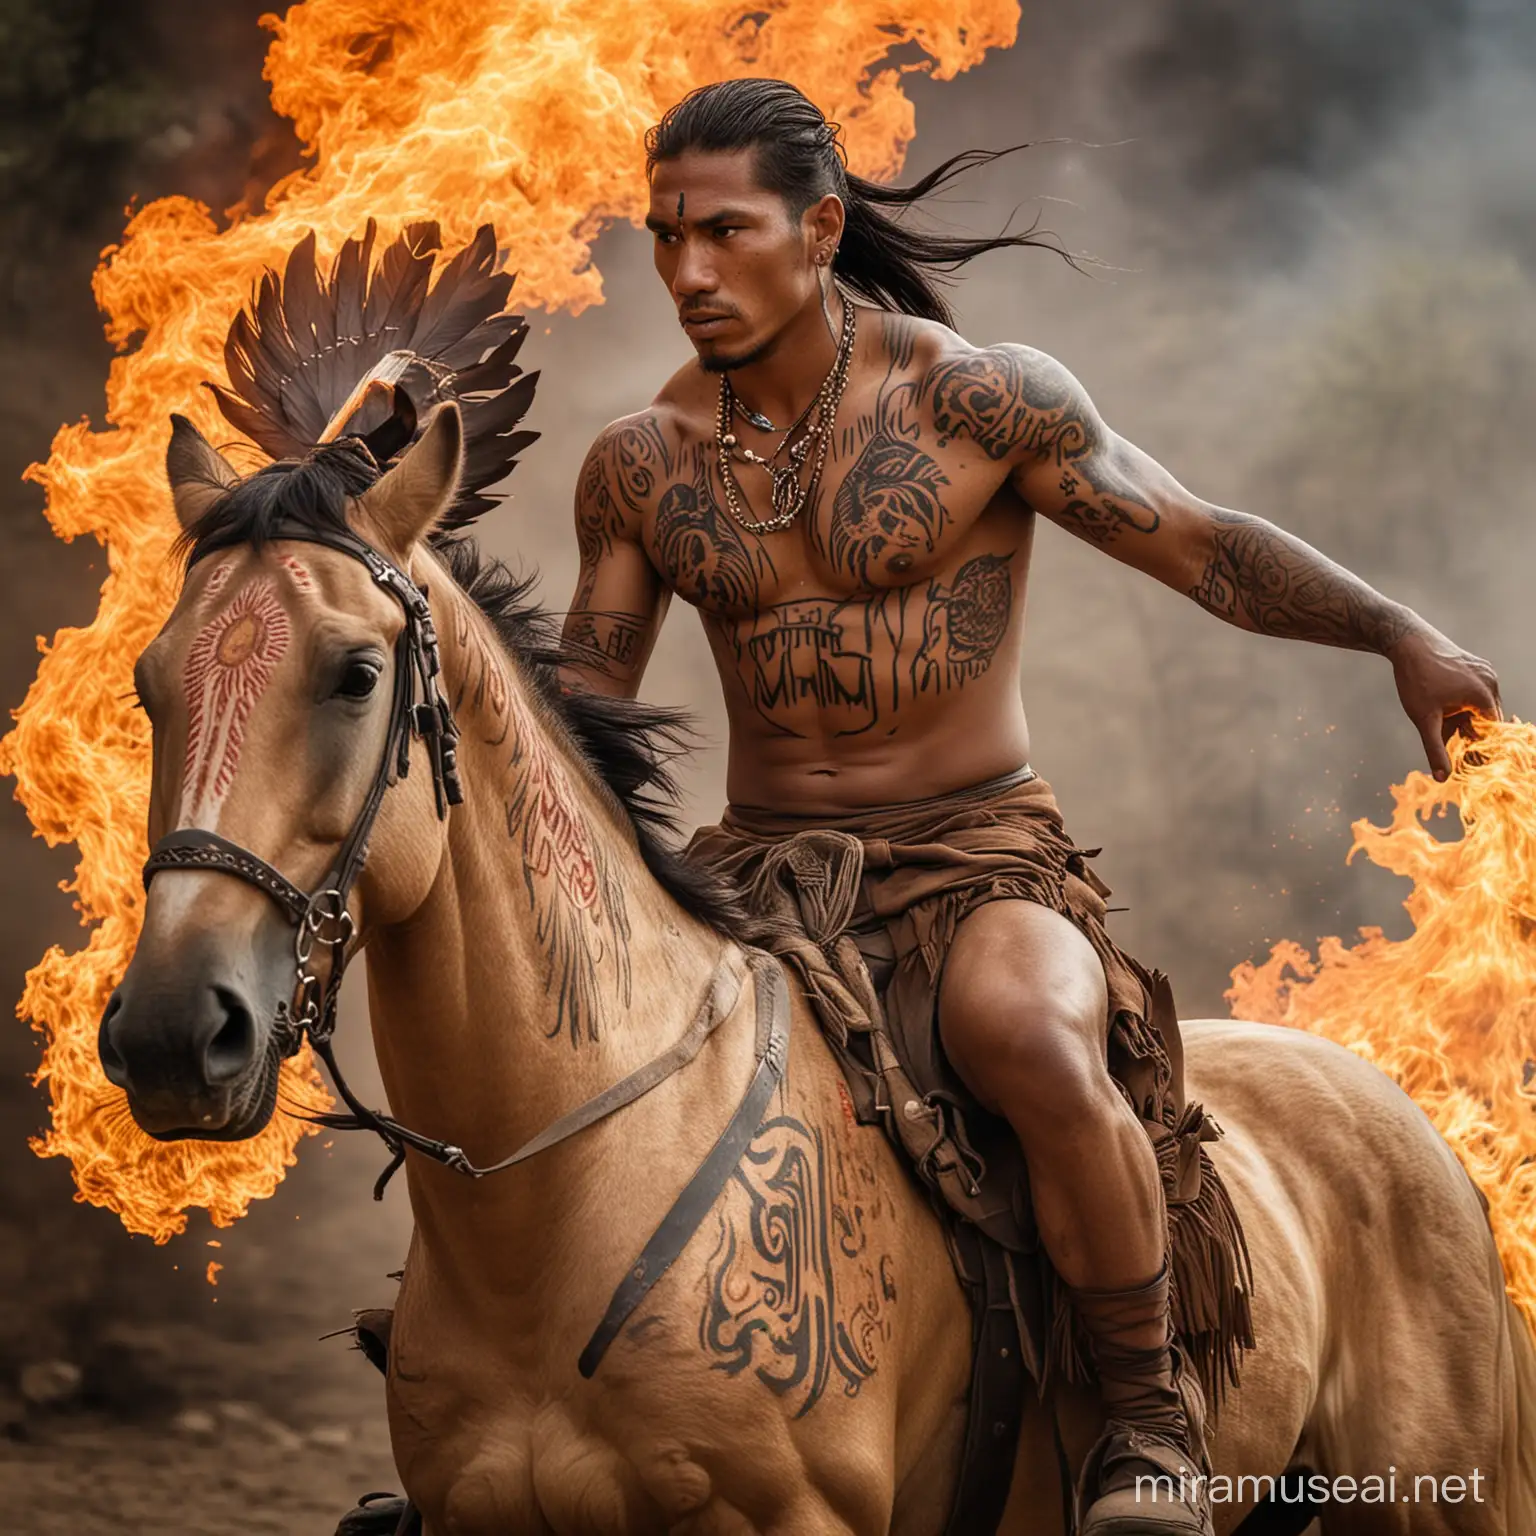 an indigenous man with T tattoos, riding a flaming horse;